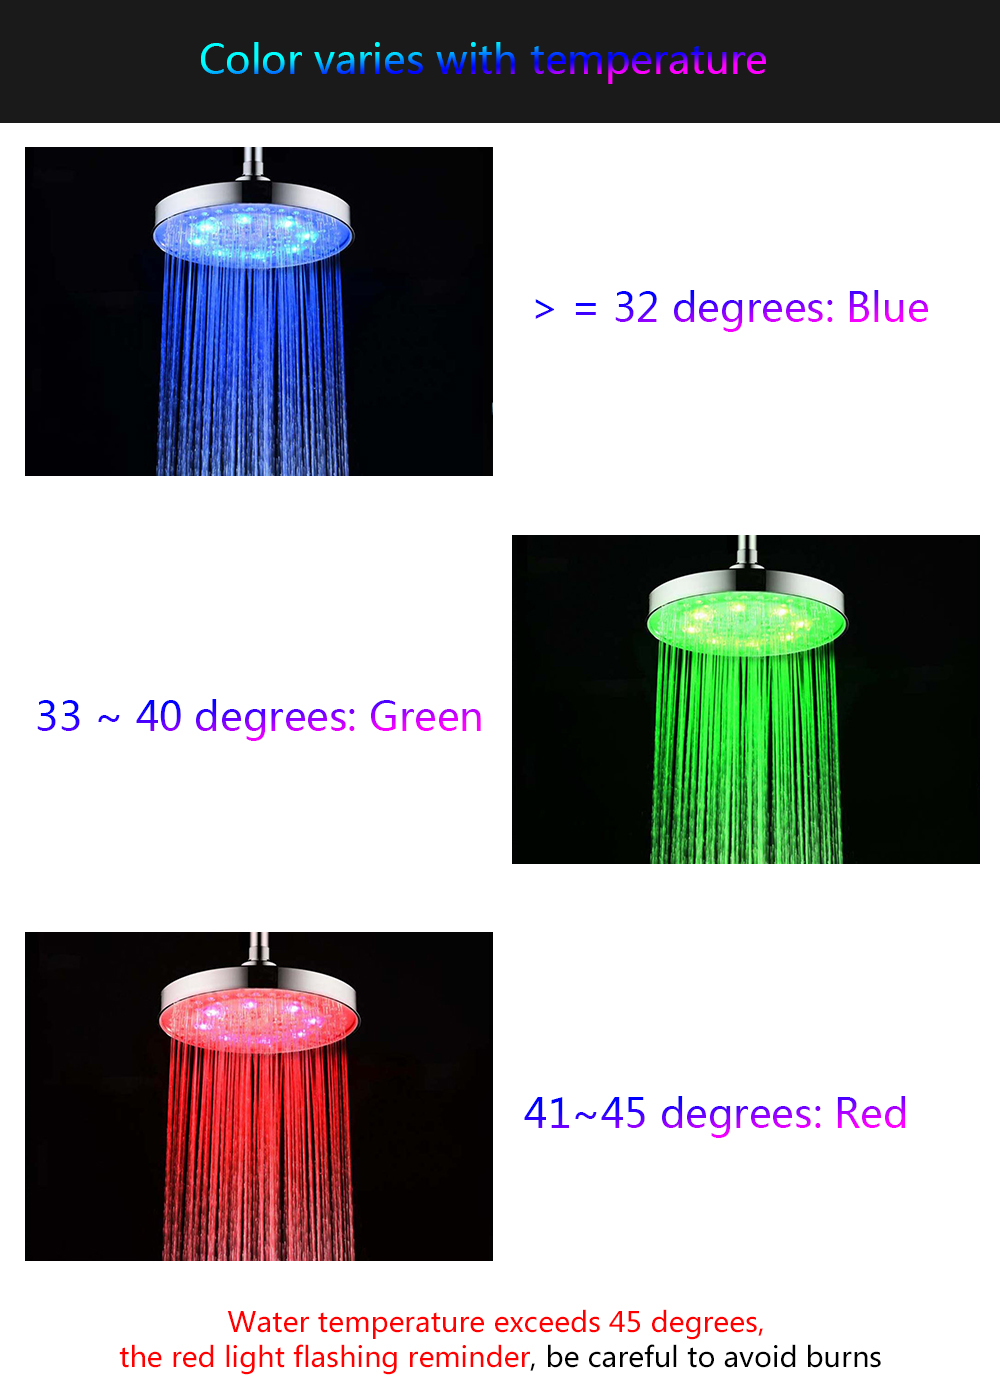 BRELONG 8 - inch LED Temperature Three-color Shower Spray Round